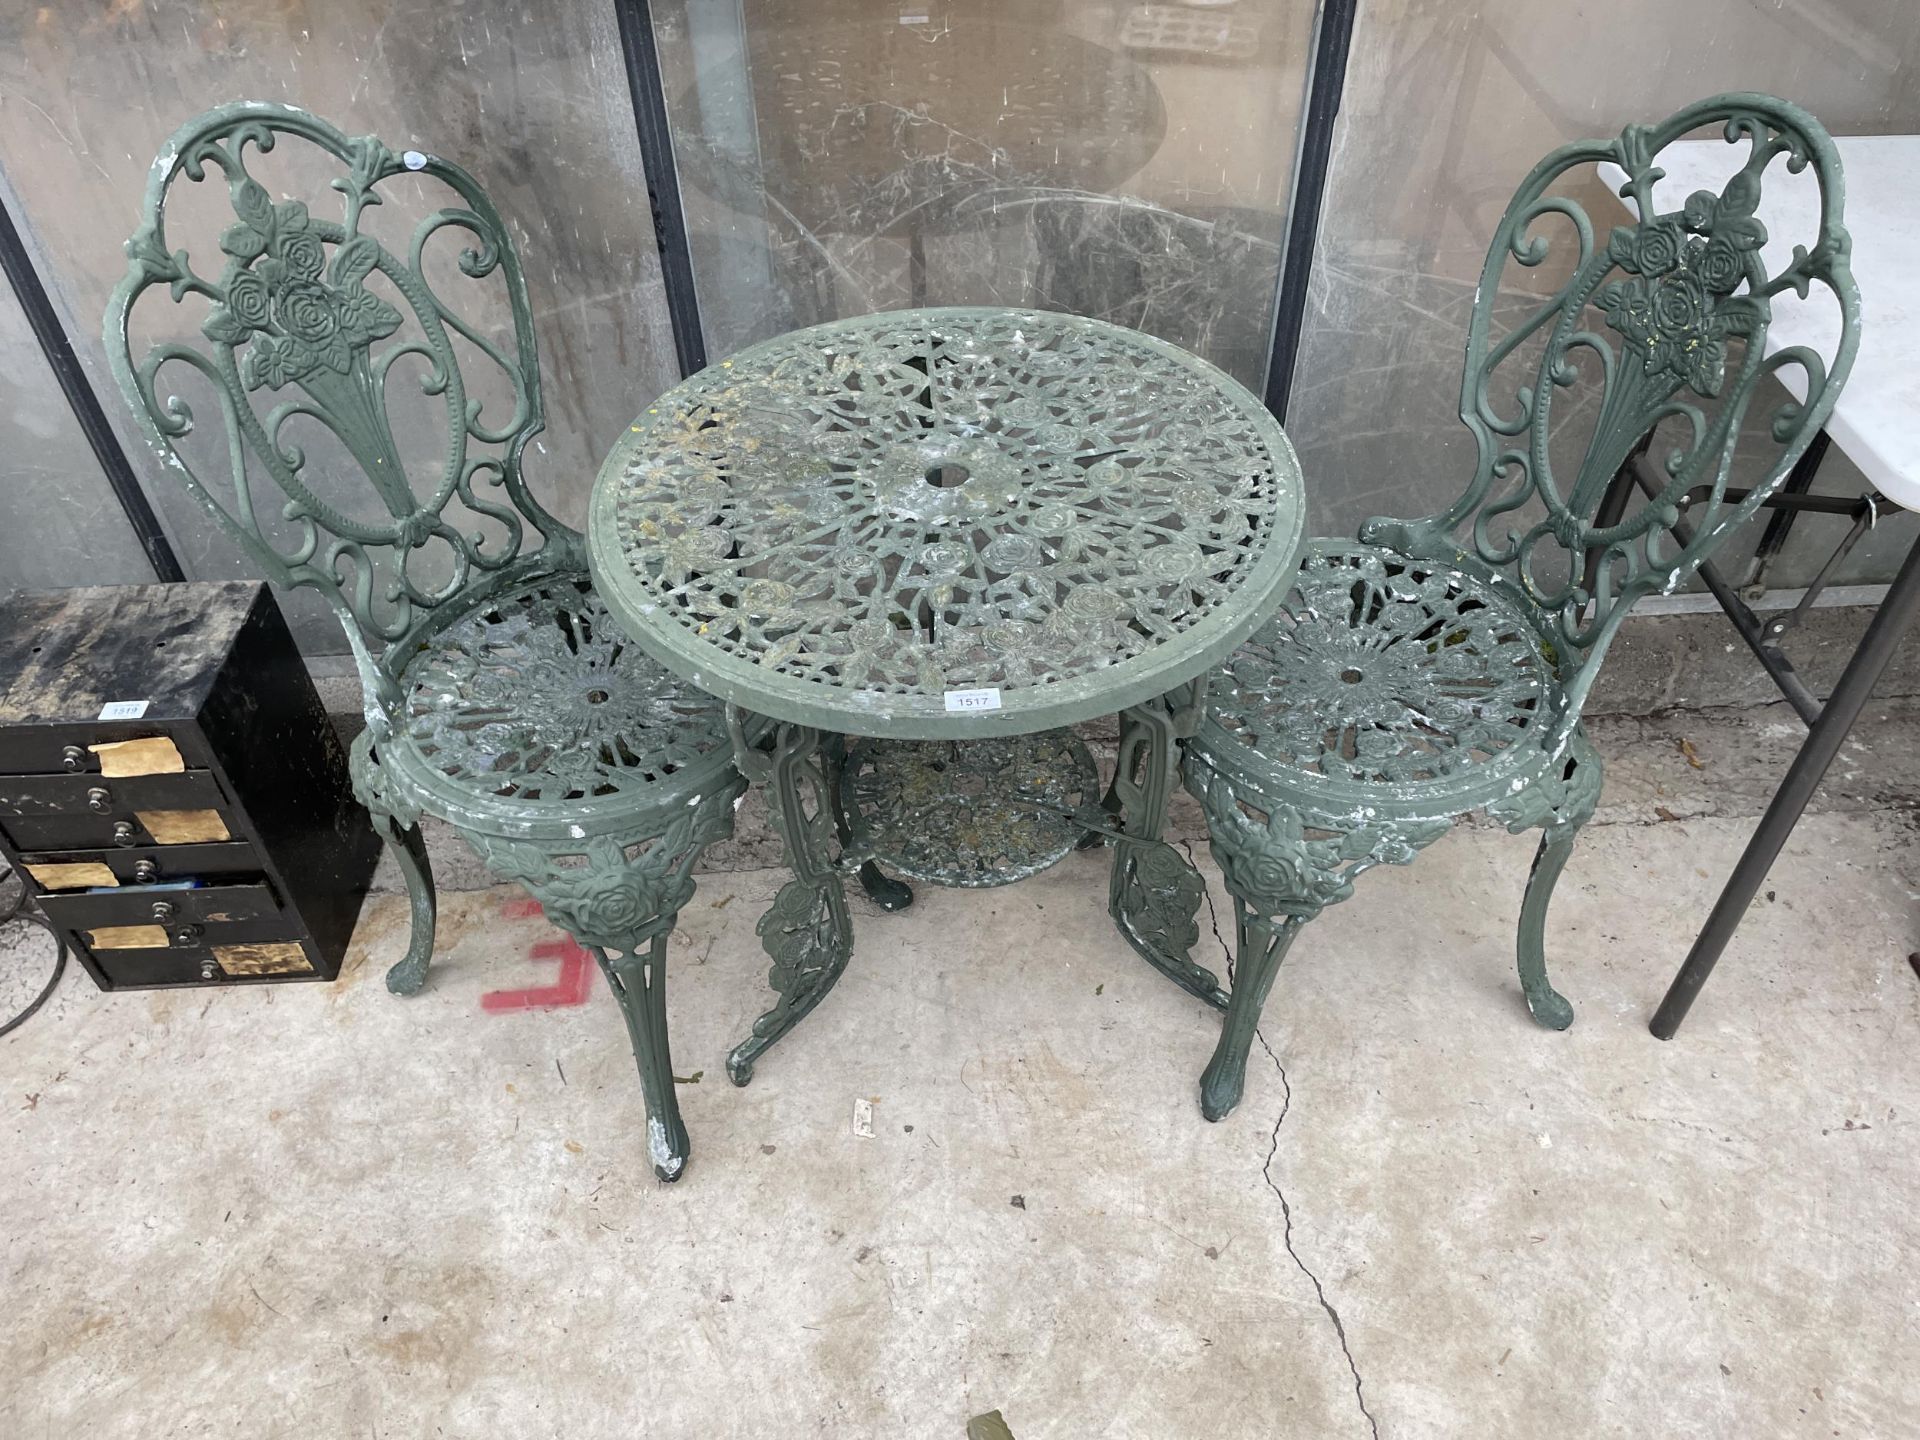 AN ALLOY BISTRO SET COMPRISING OF A ROUND TABLE AND TWO CHAIRS